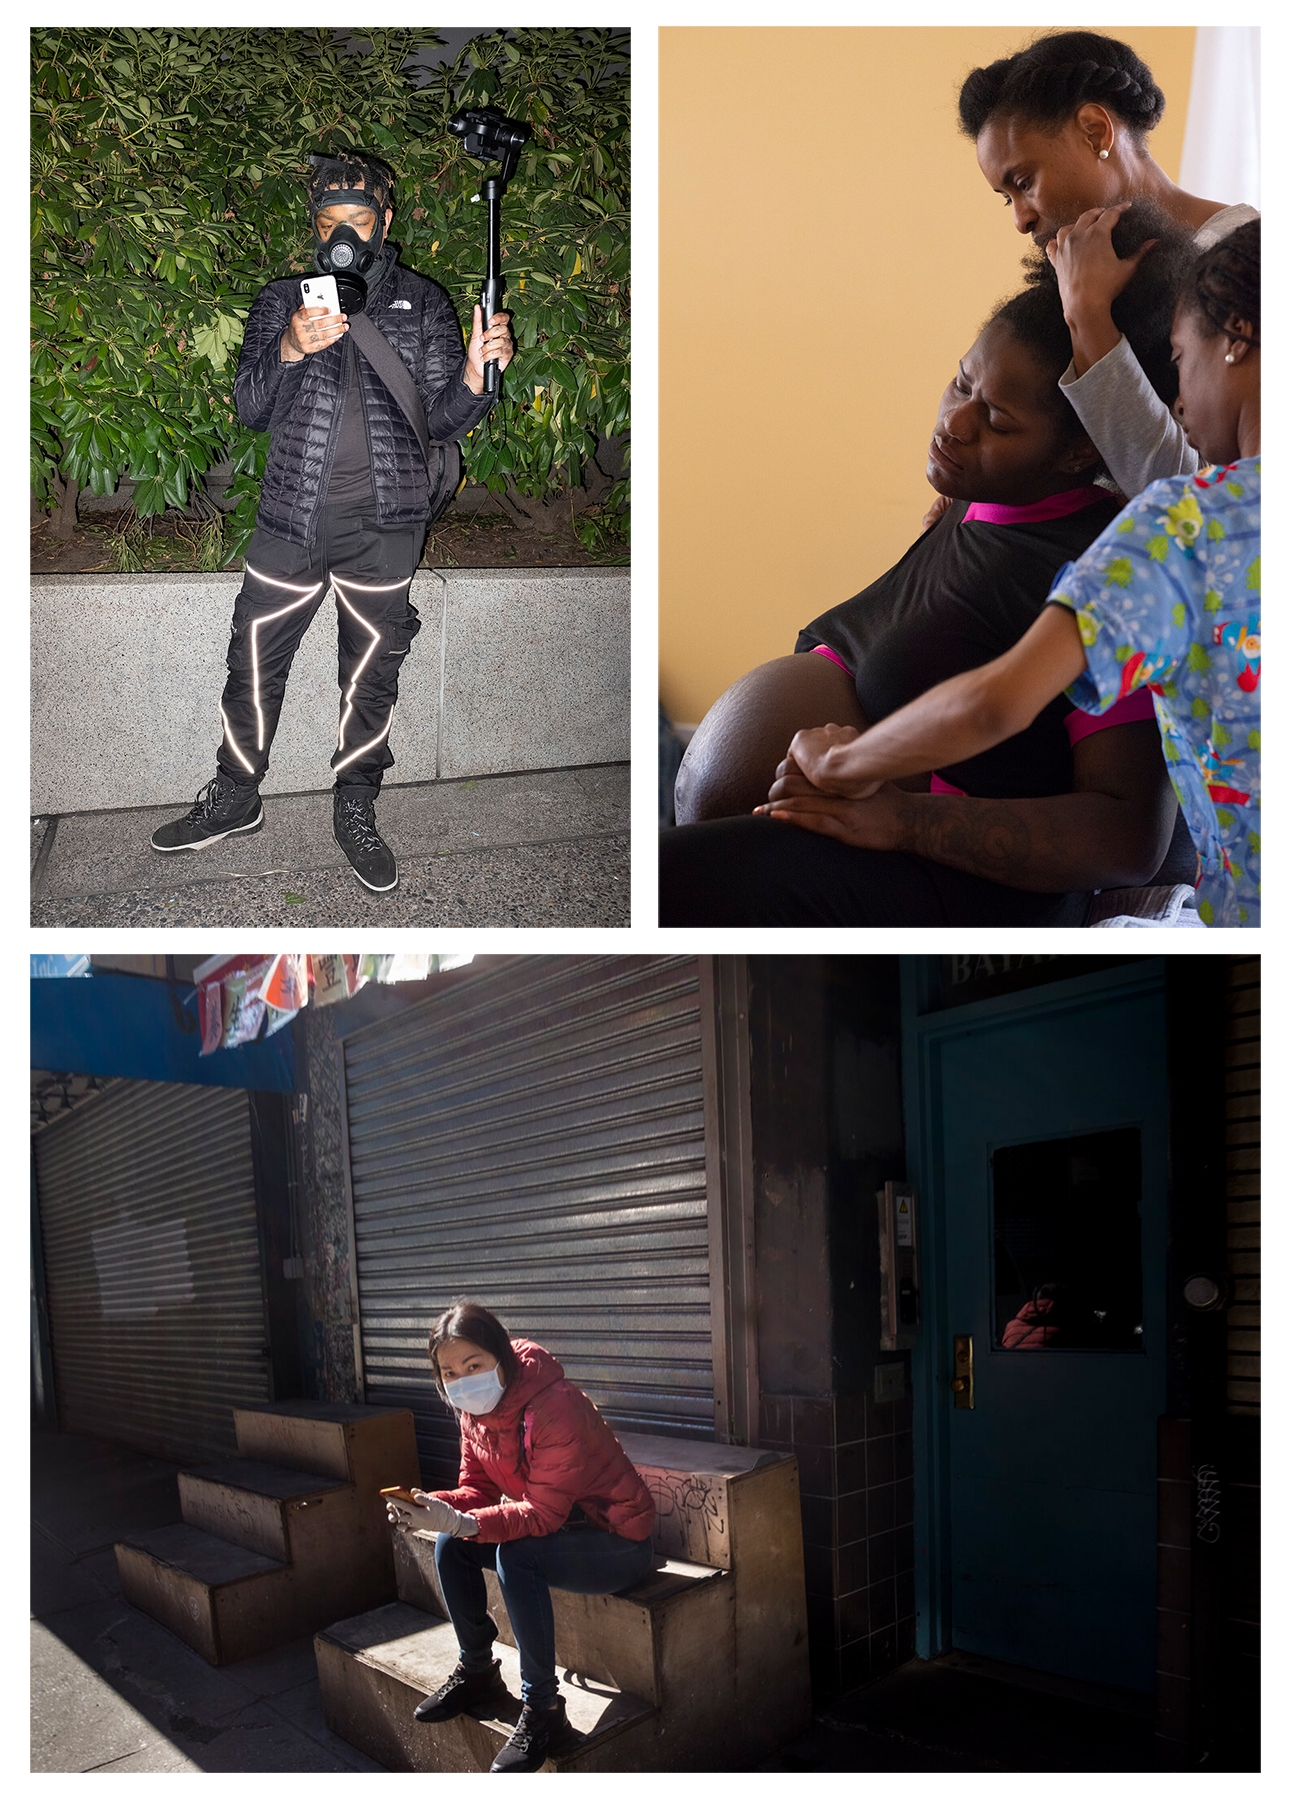 Three images: First one is a man dress in black behind bushes holding a camera and wearing a hazmat mask. Second image is a women and child behind a lady who is giving birth. The final image is a women sitting on some steps with a face mask.